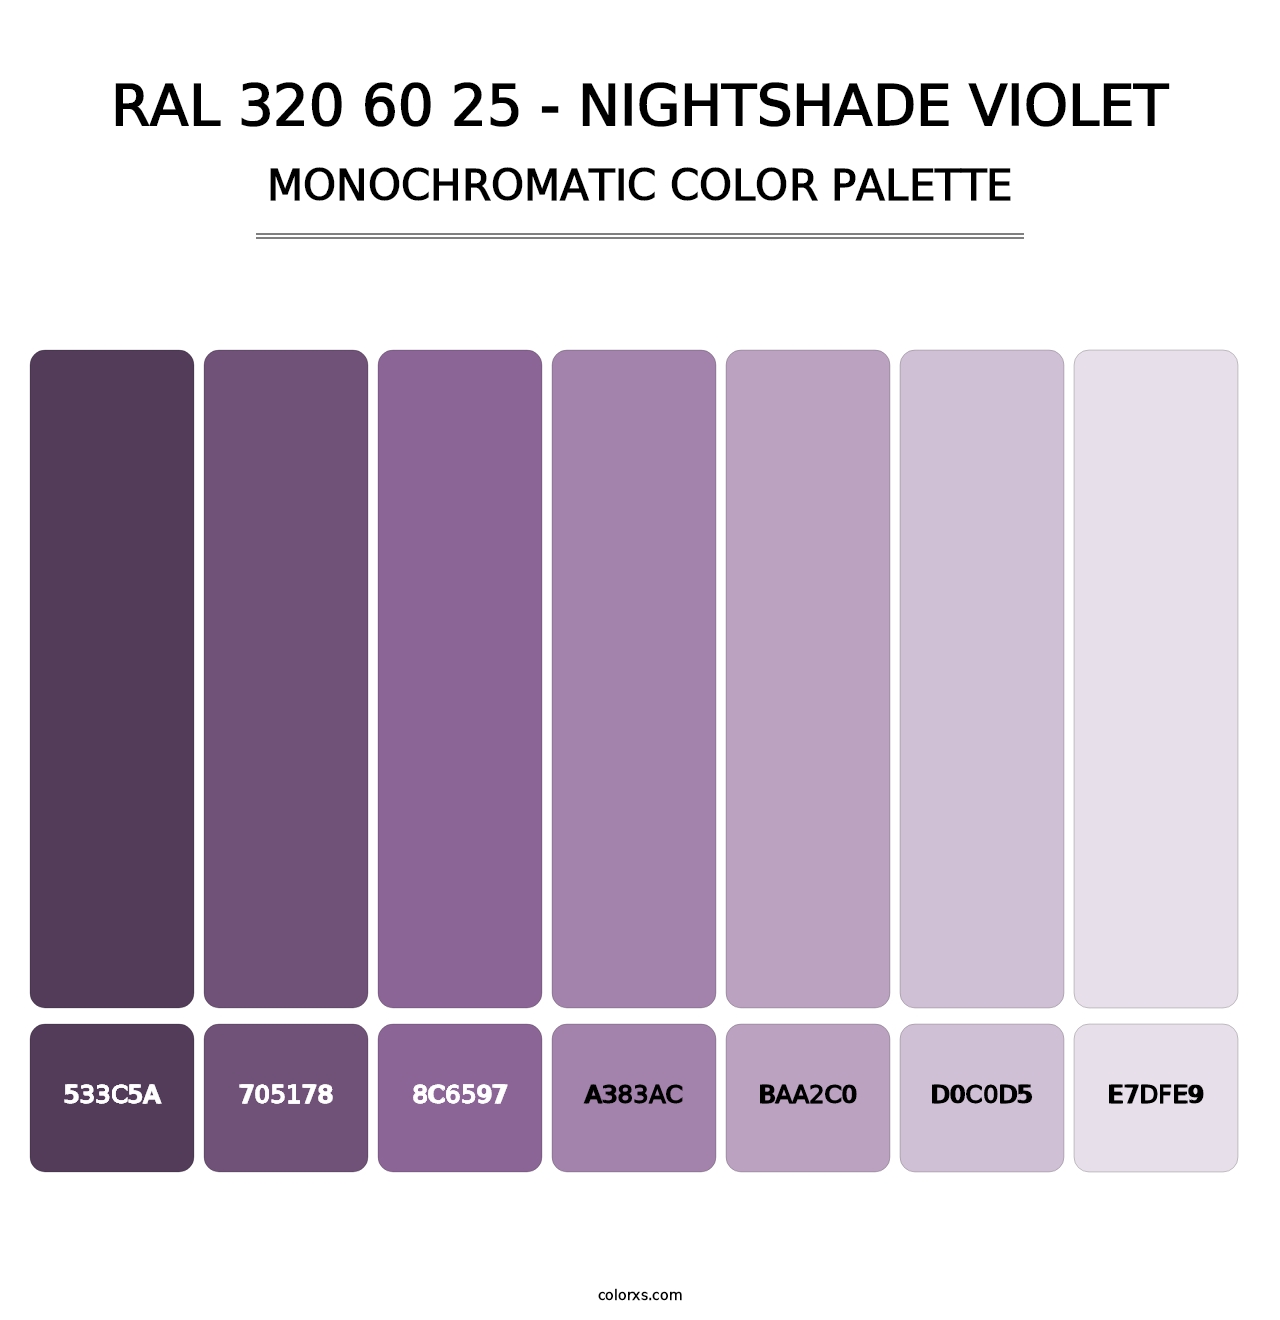 RAL 320 60 25 - Nightshade Violet - Monochromatic Color Palette